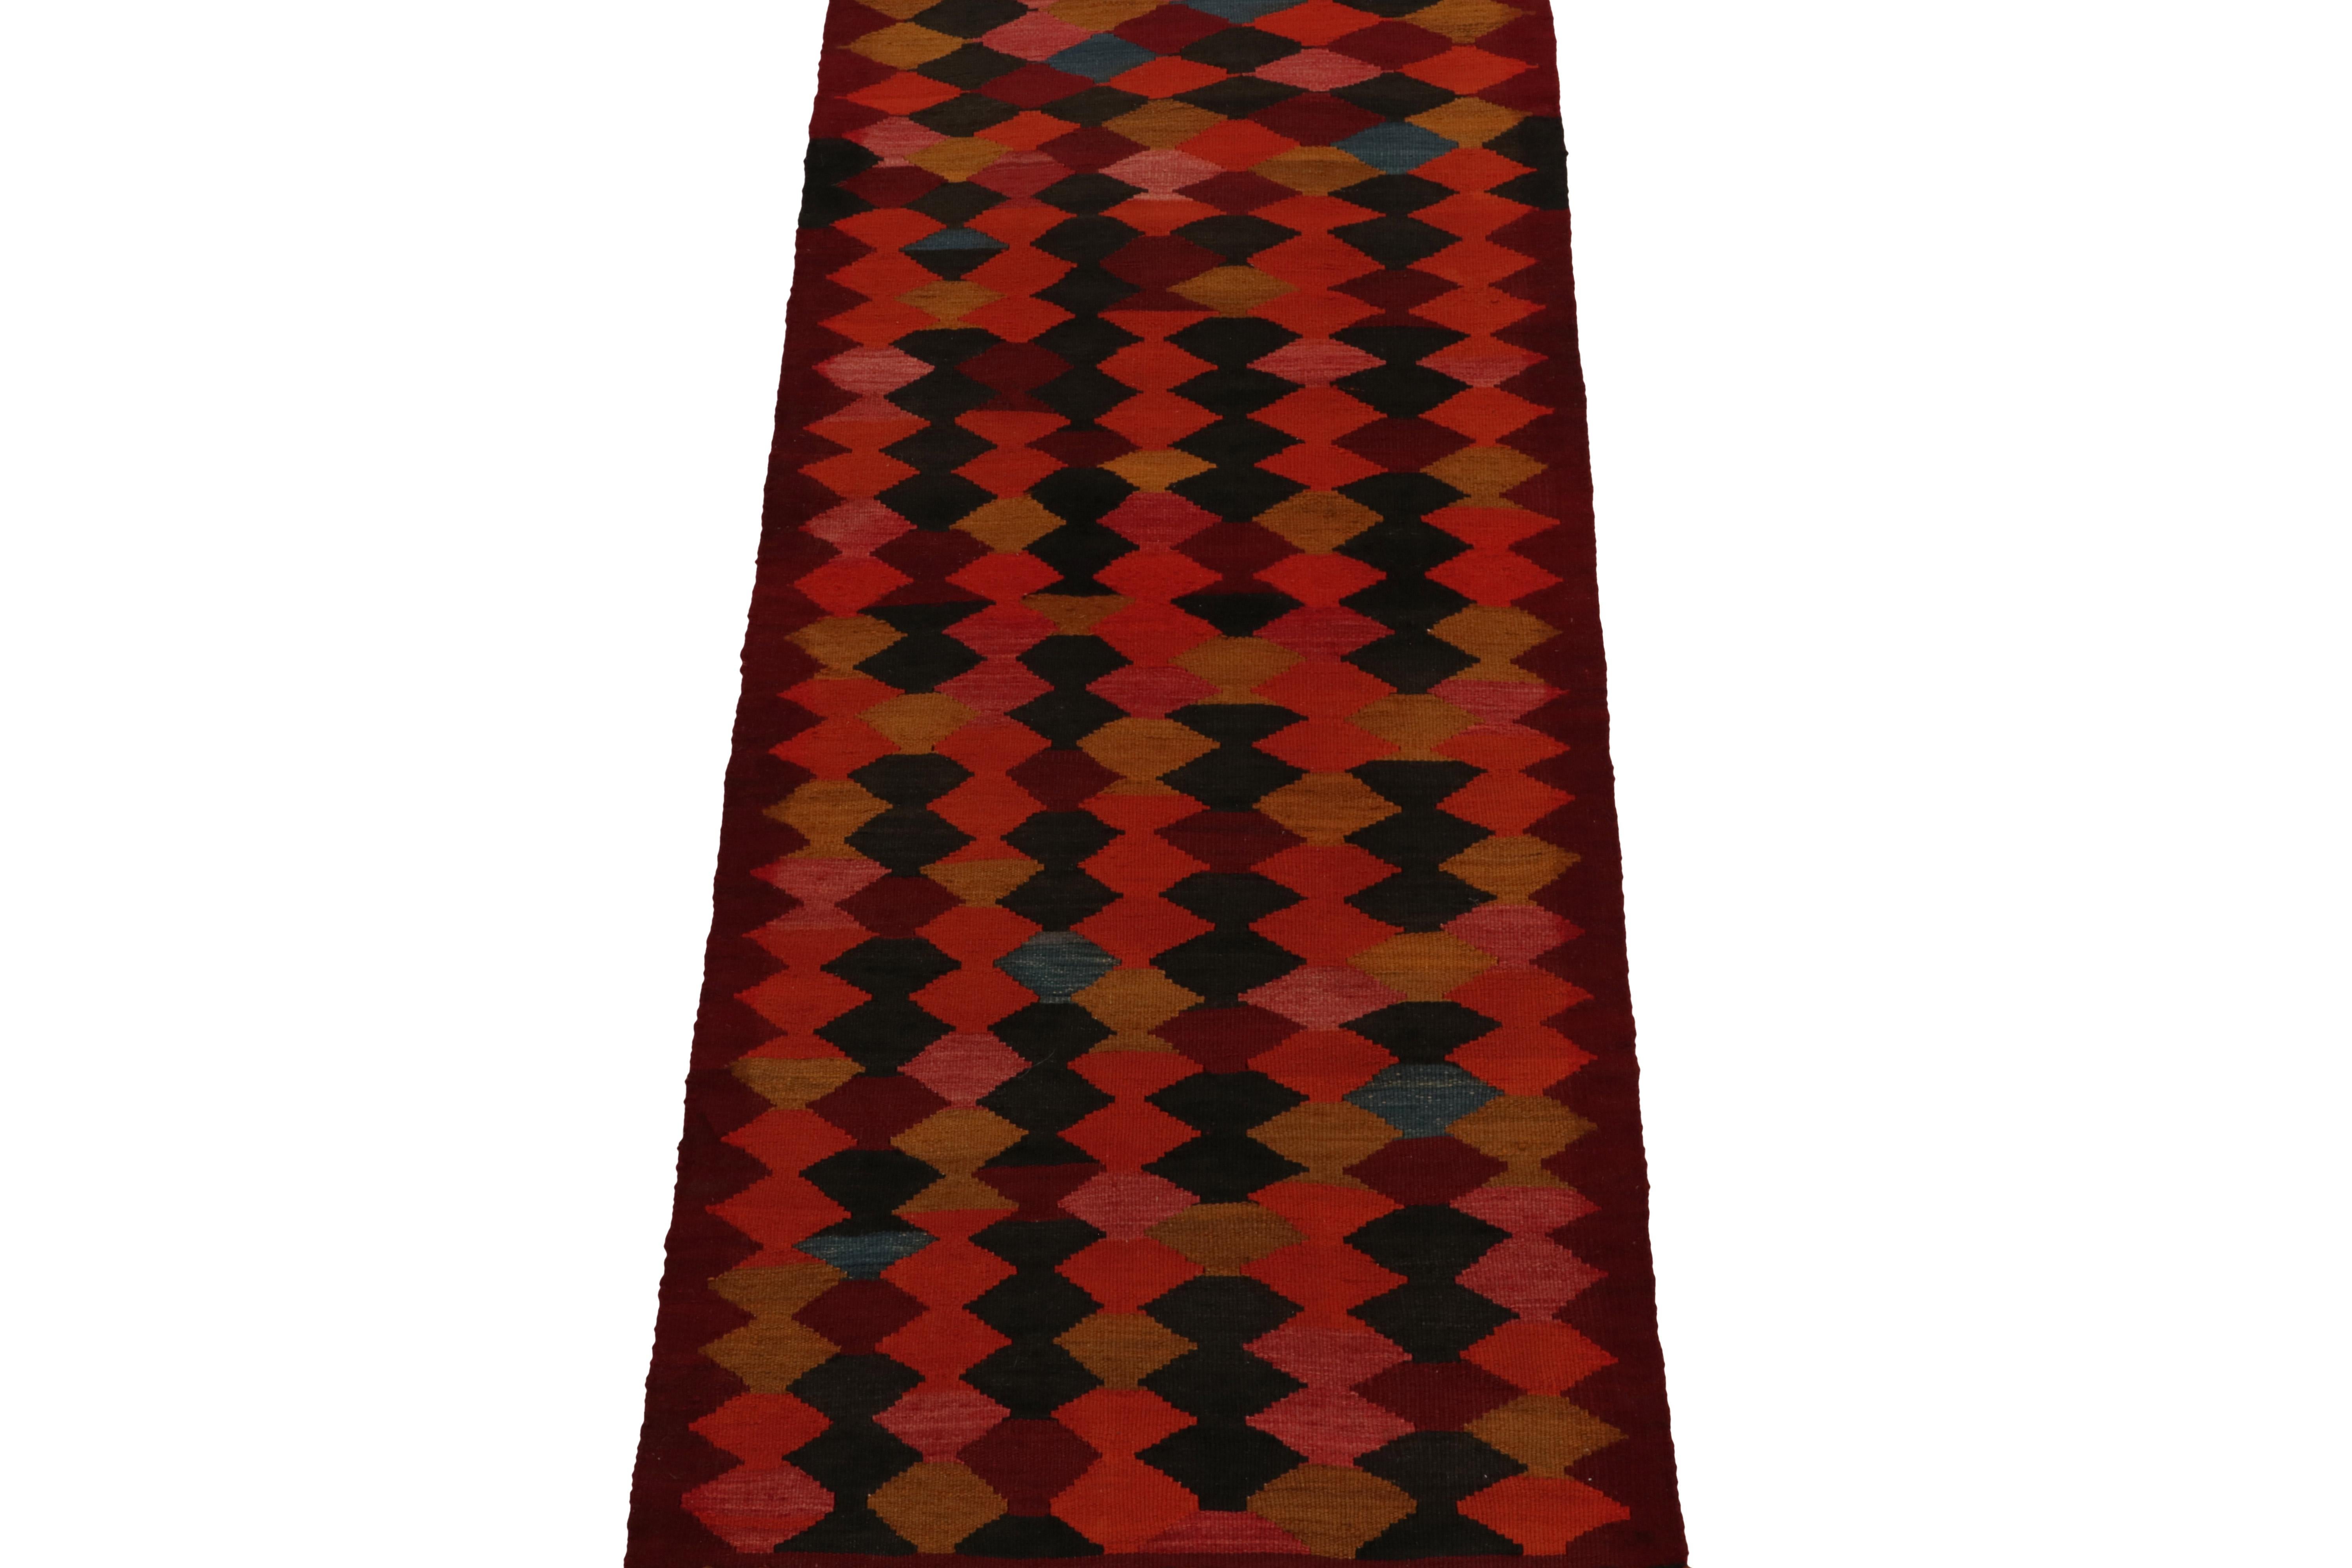 Handwoven in wool circa 1950-1960, a rare mid-century curation of small-sized Kilim runners new to our classic tribal collection.

Distinguished from one our principal’s favorite Persian workshops, the piece carries a unique attitude and